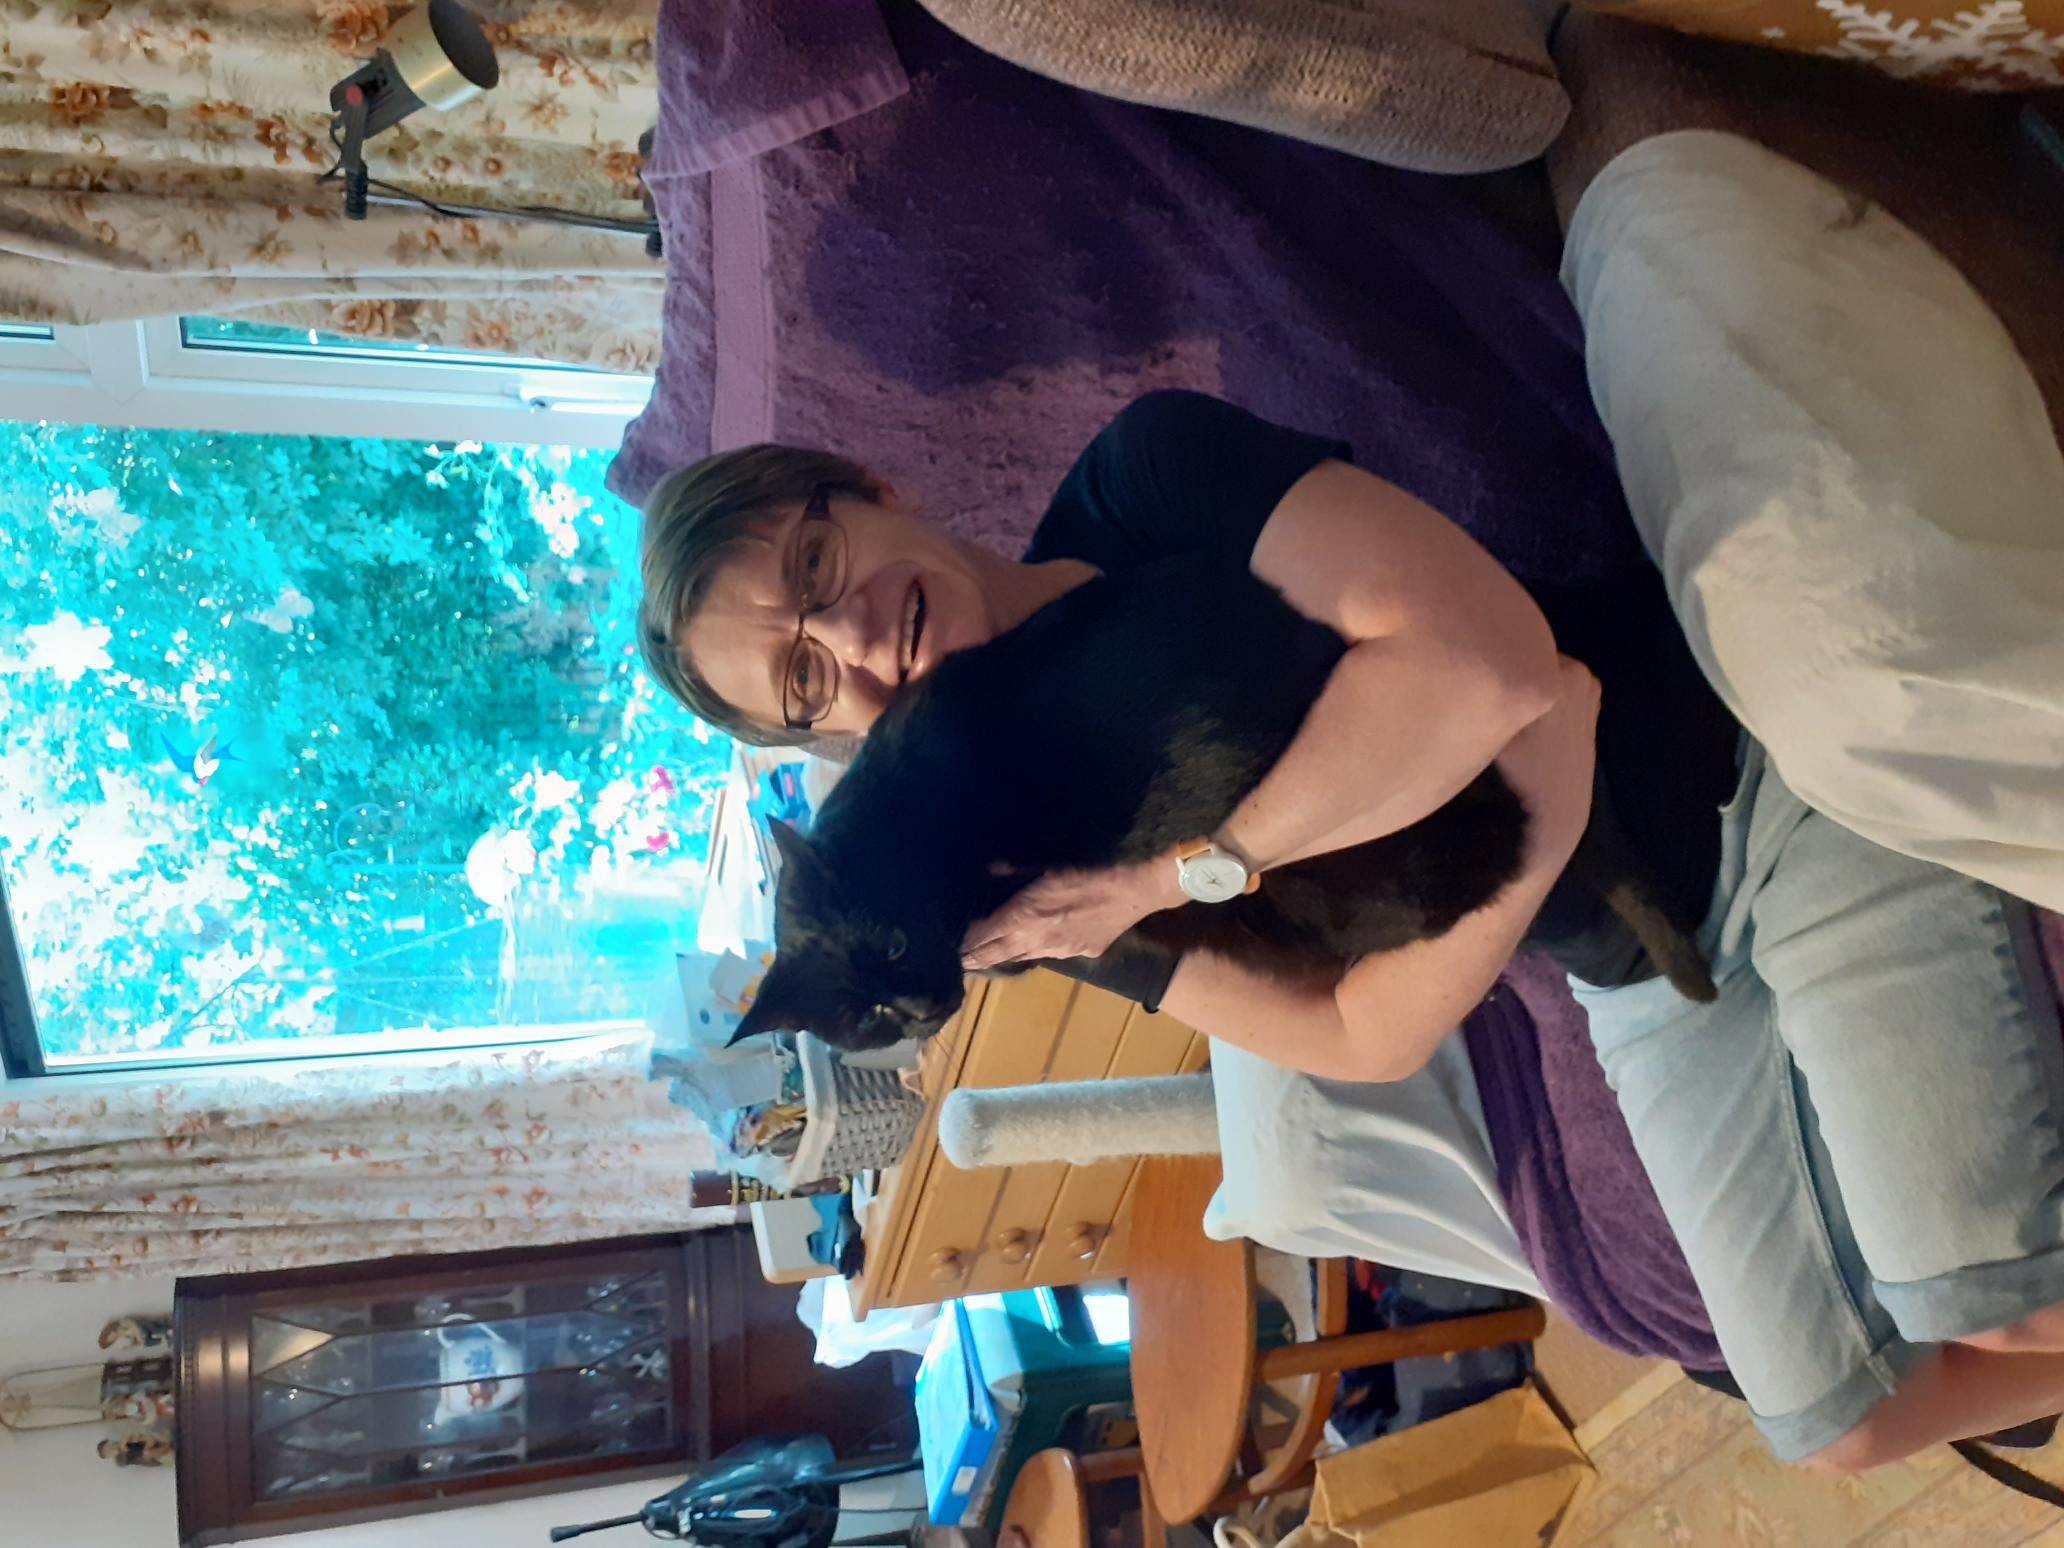 Anke, a lady sitting in an armchair holding a black cat on her lap, smiling at the camera.